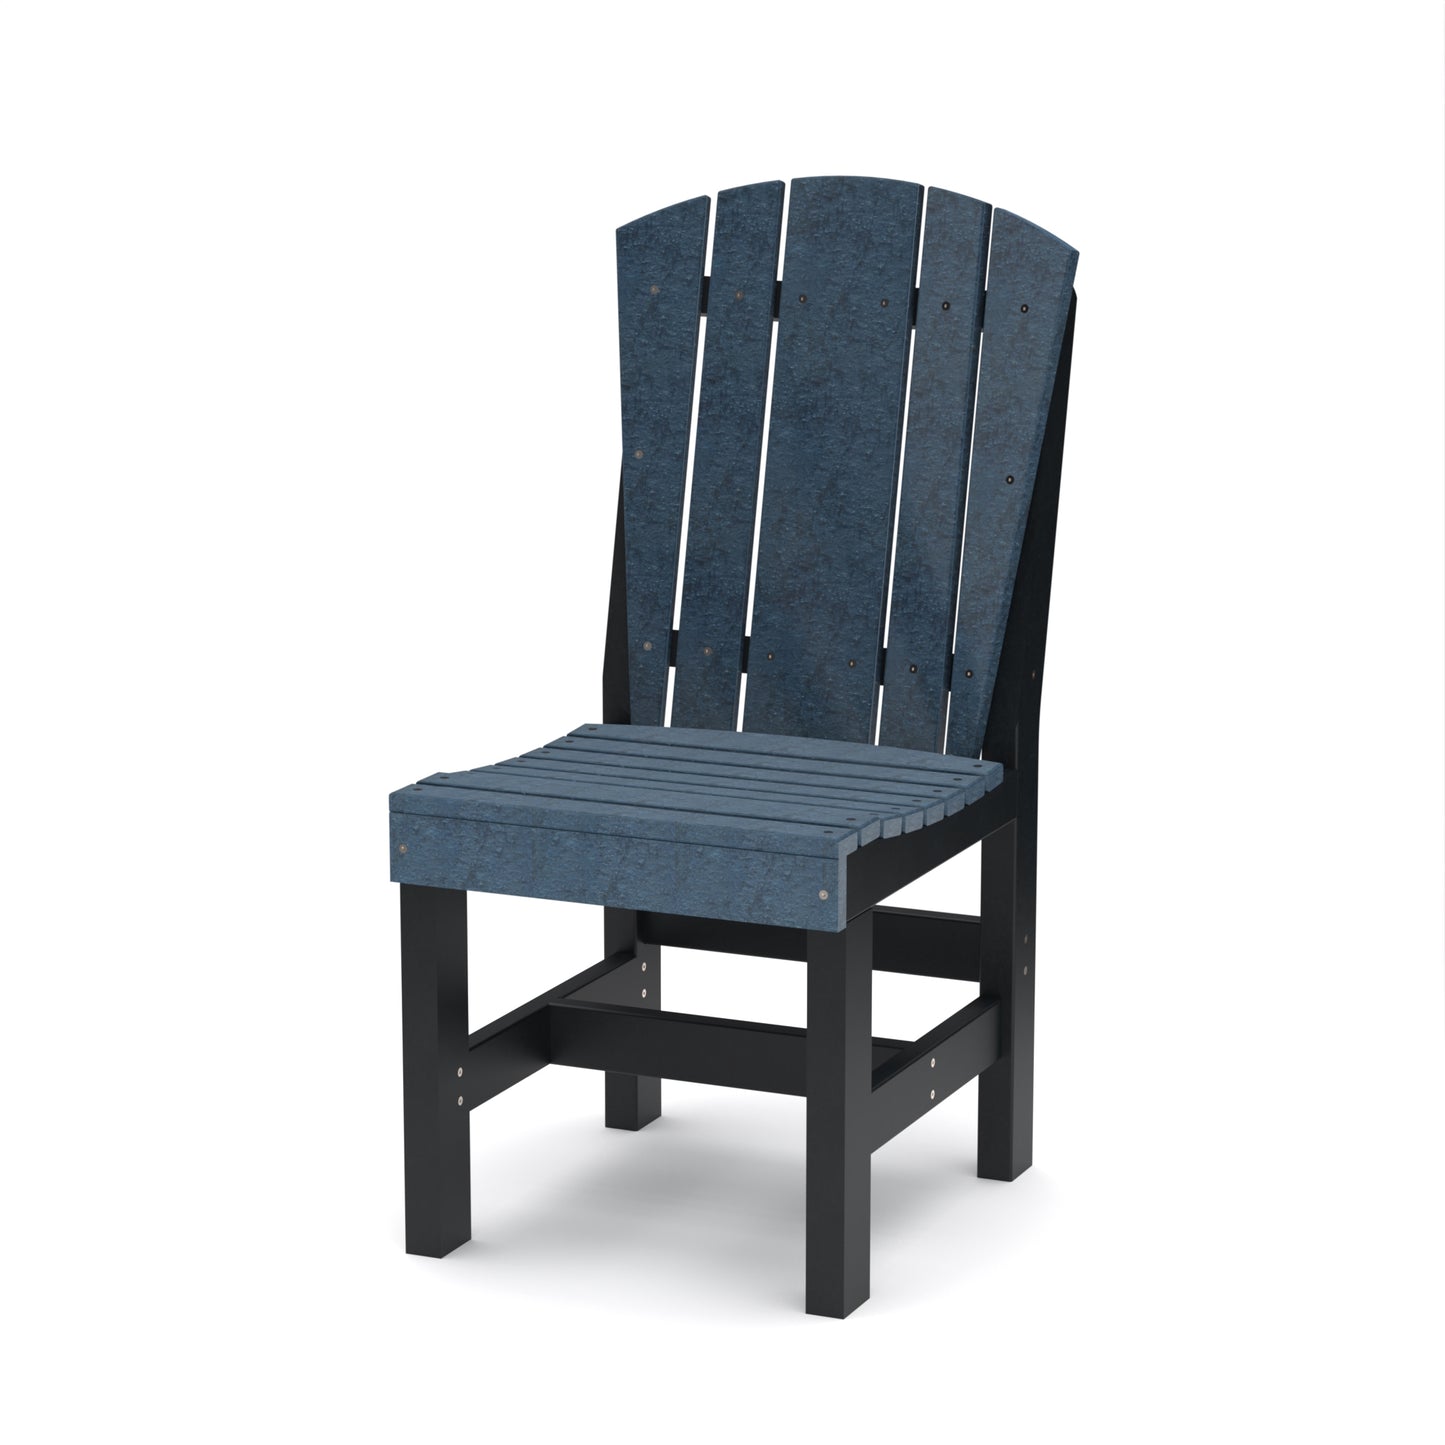 Wildridge Recycled Plastic Heritage Outdoor Dining Chair - LEAD TIME TO SHIP 4 WEEKS